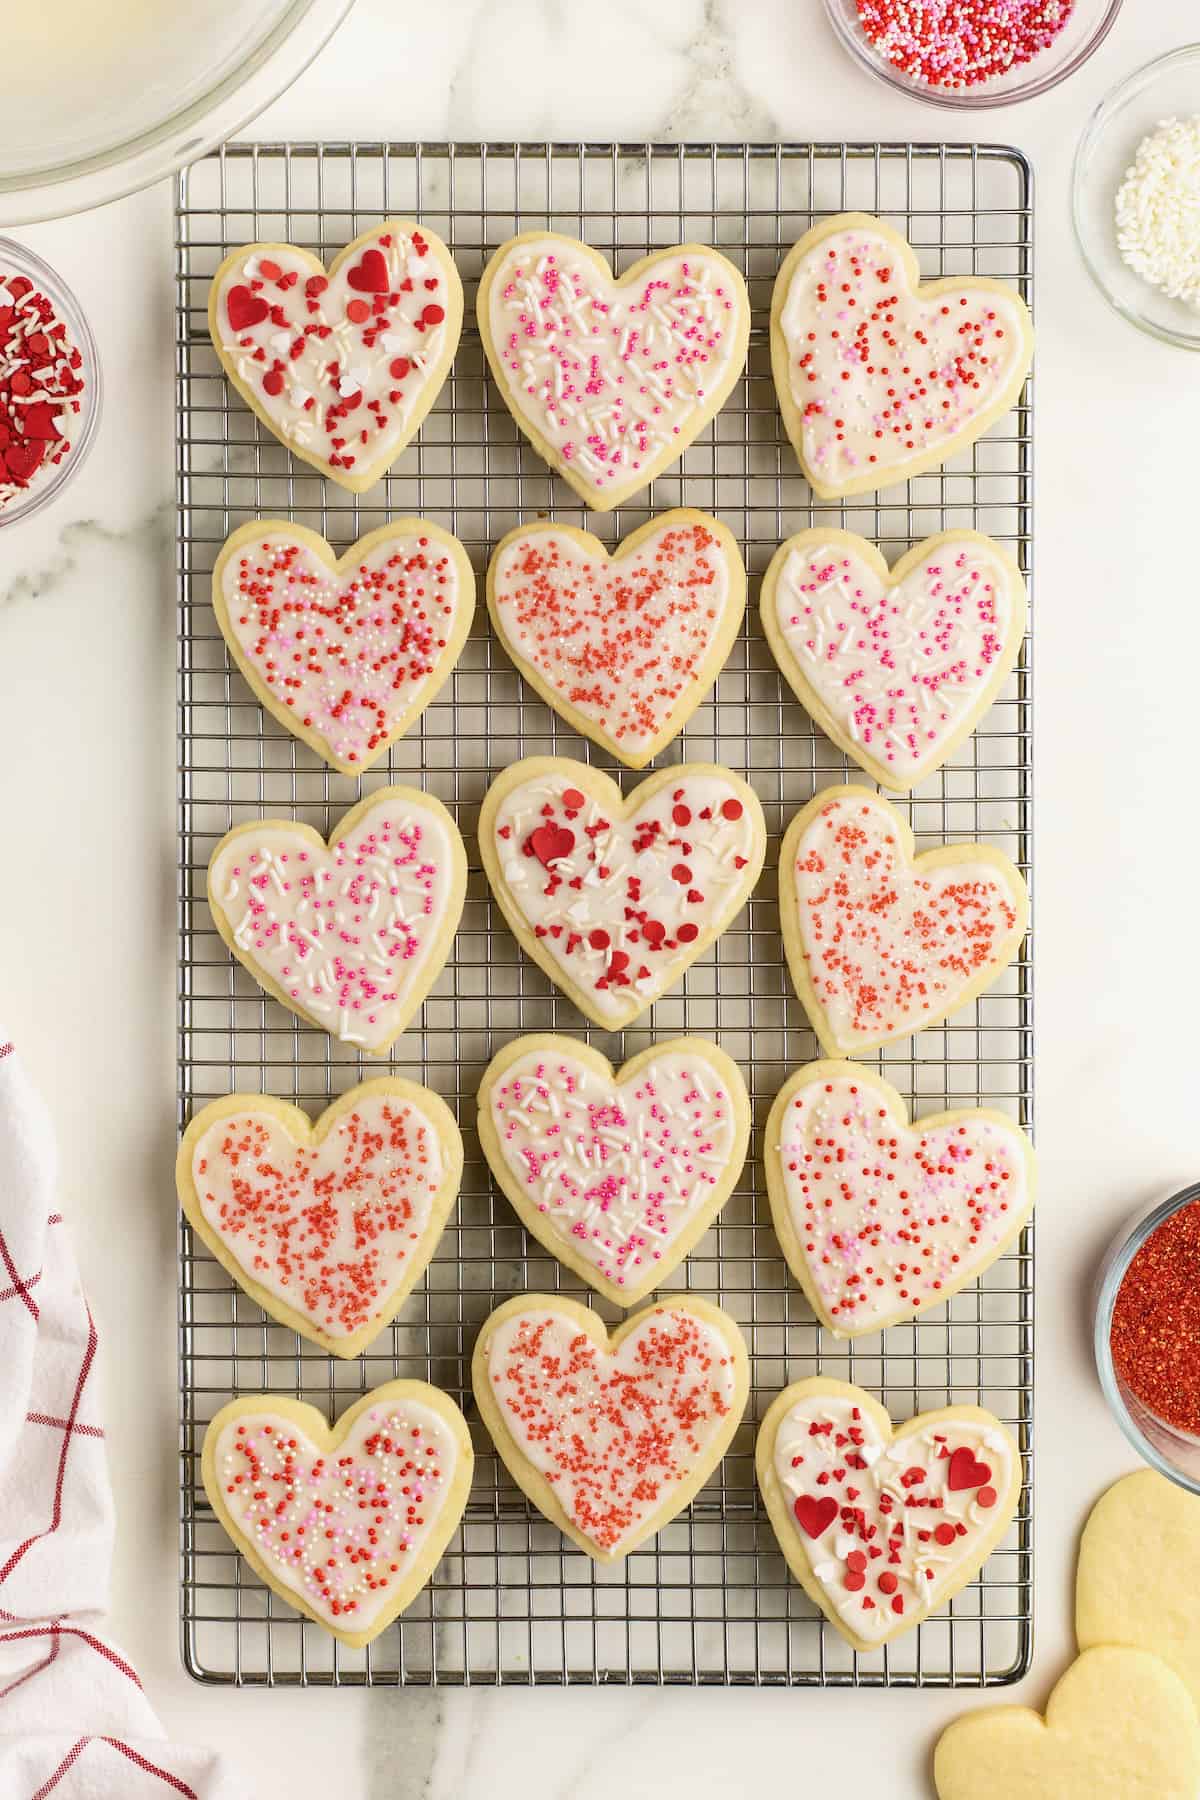 15 heart shaped sugar cookies with white frosting and red and pink sprinkles on a wire cooling rack on a white marble counter.